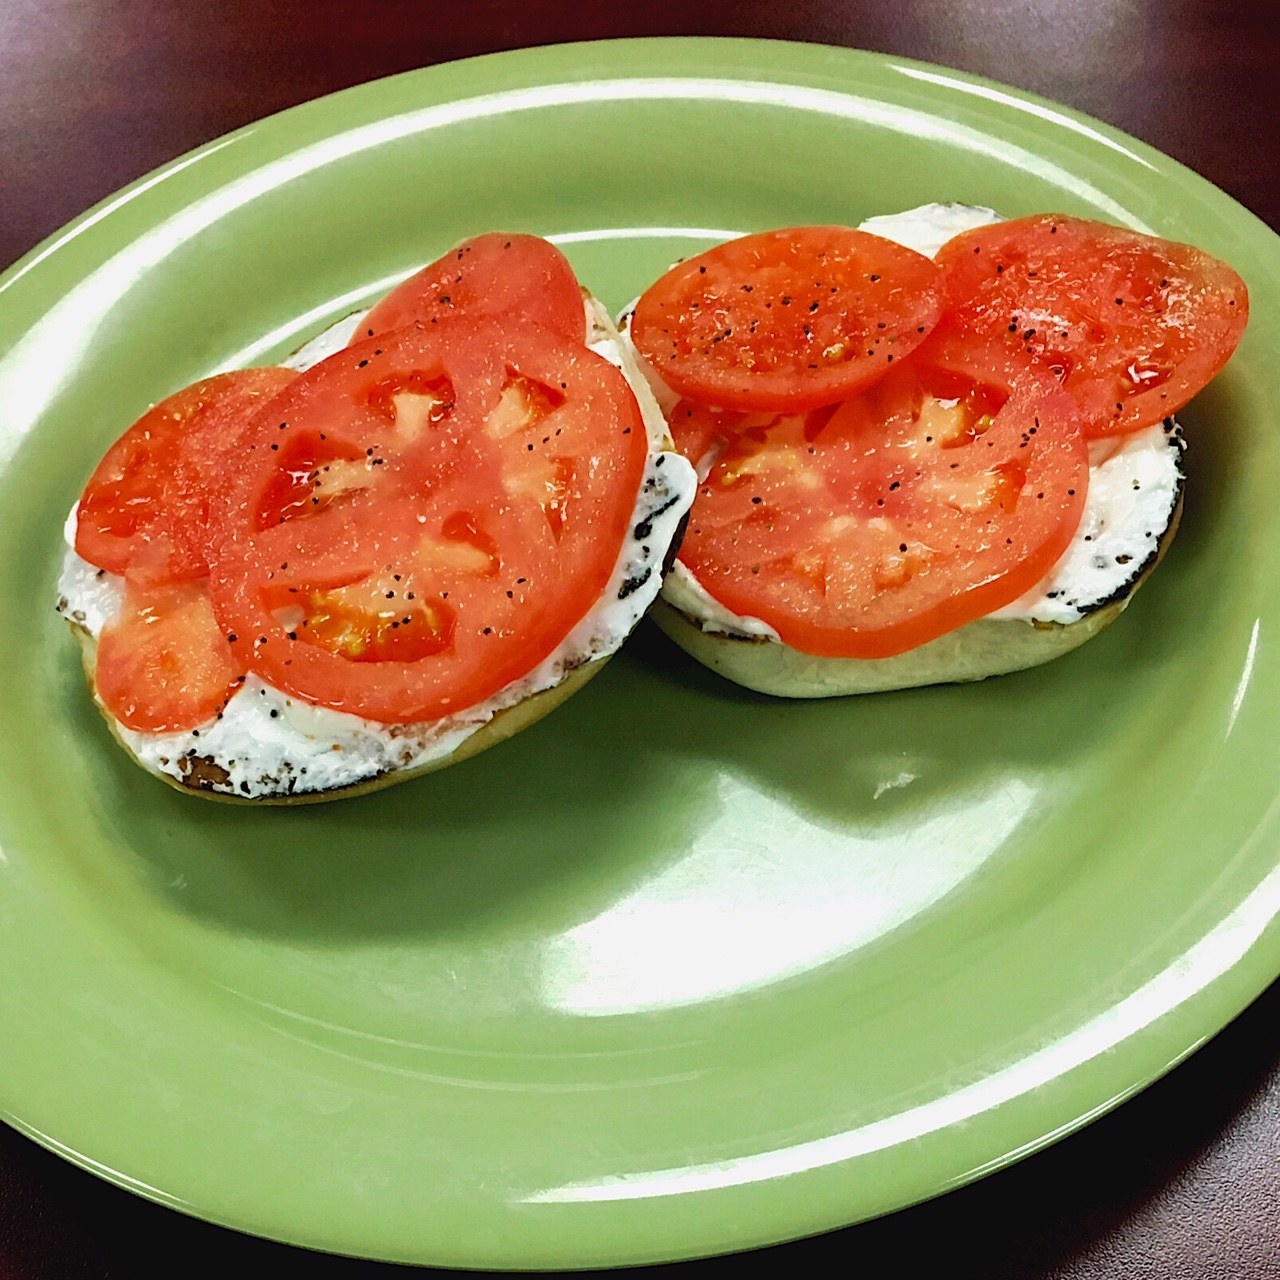 bagel without lox